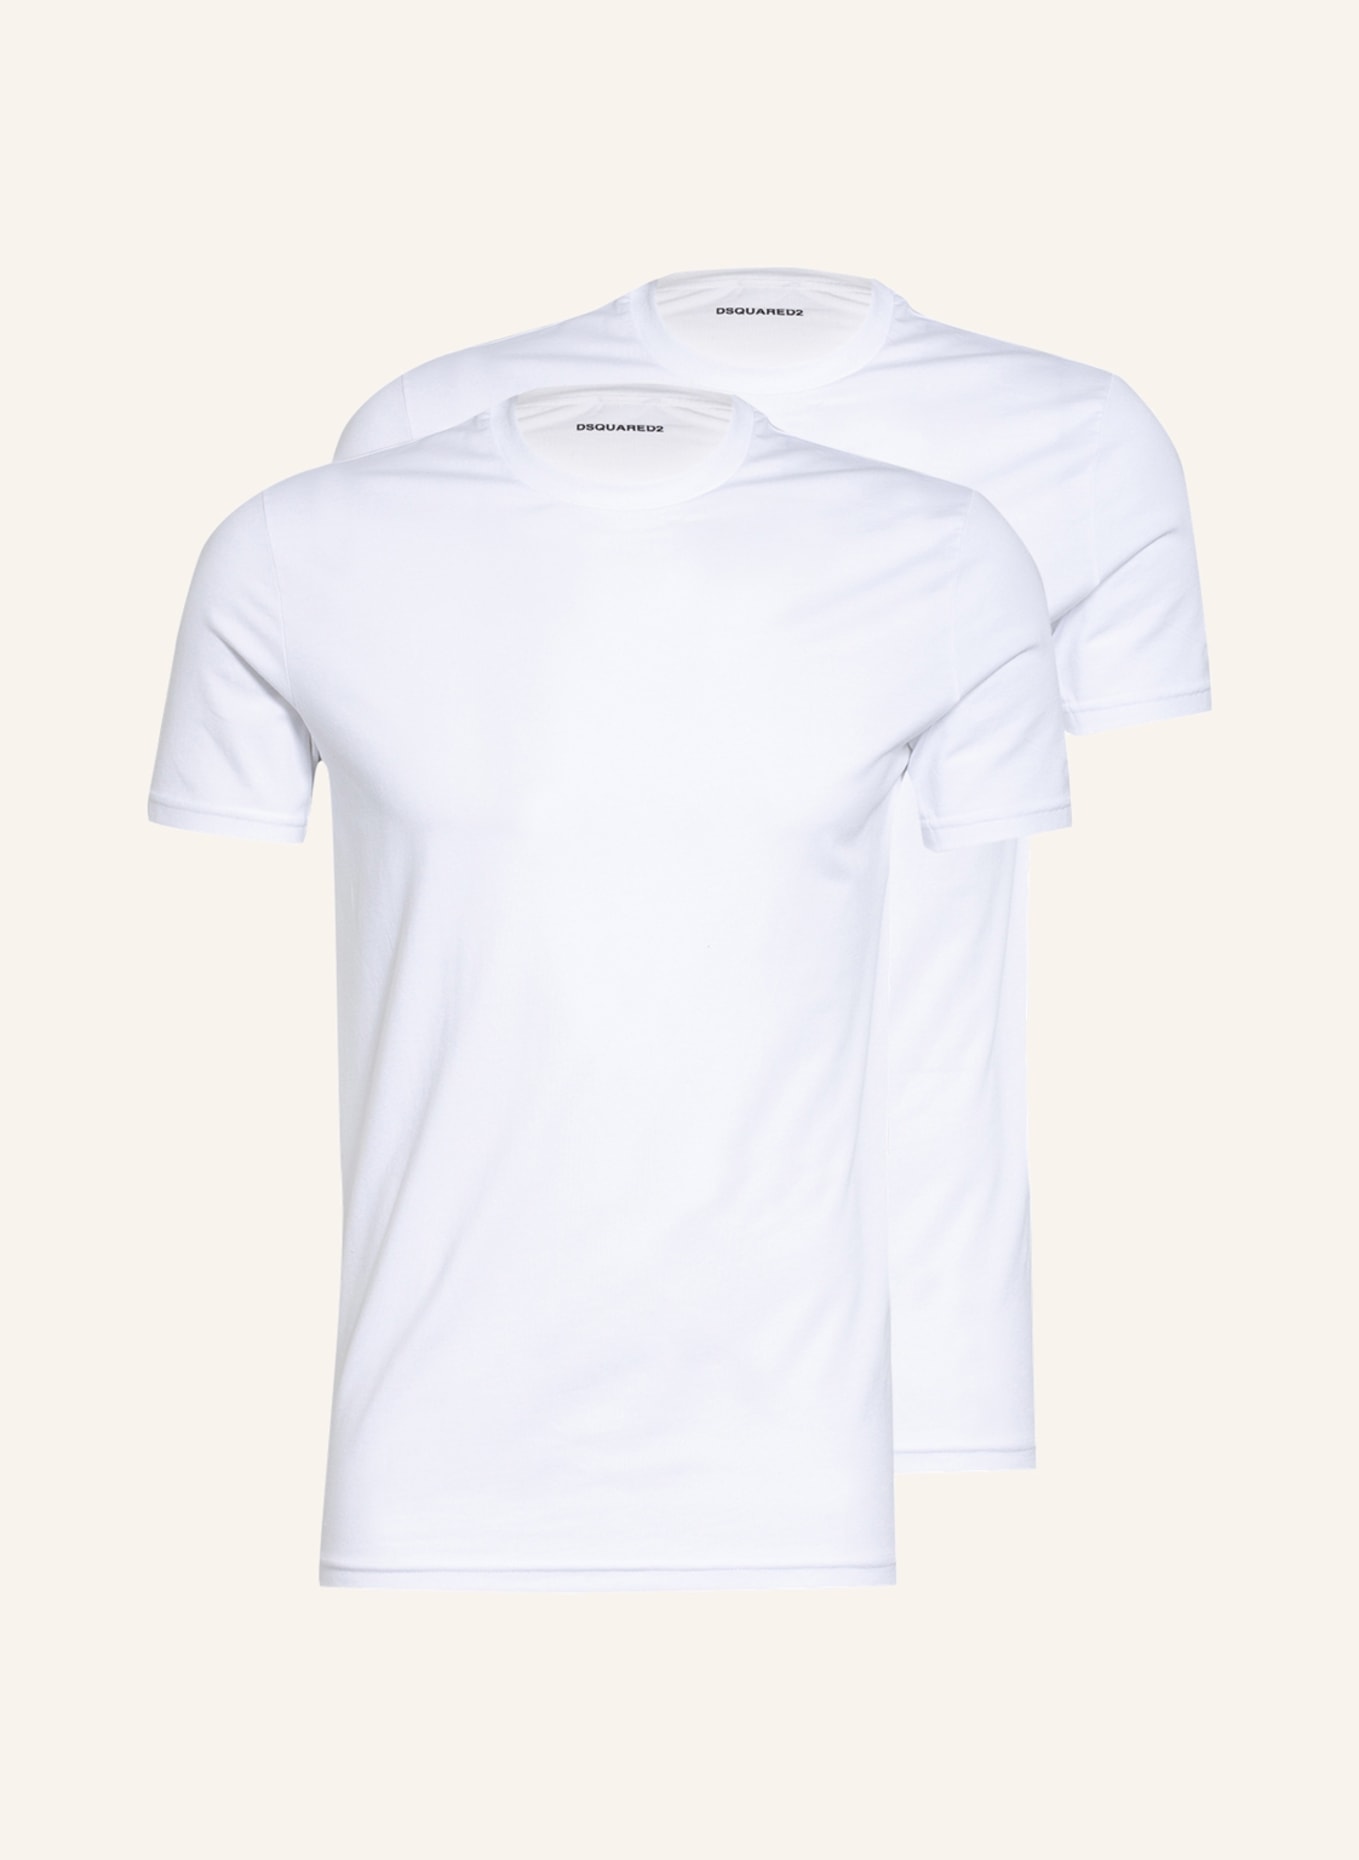 DSQUARED2 2er-Pack T-Shirts , Farbe: WEISS (Bild 1)